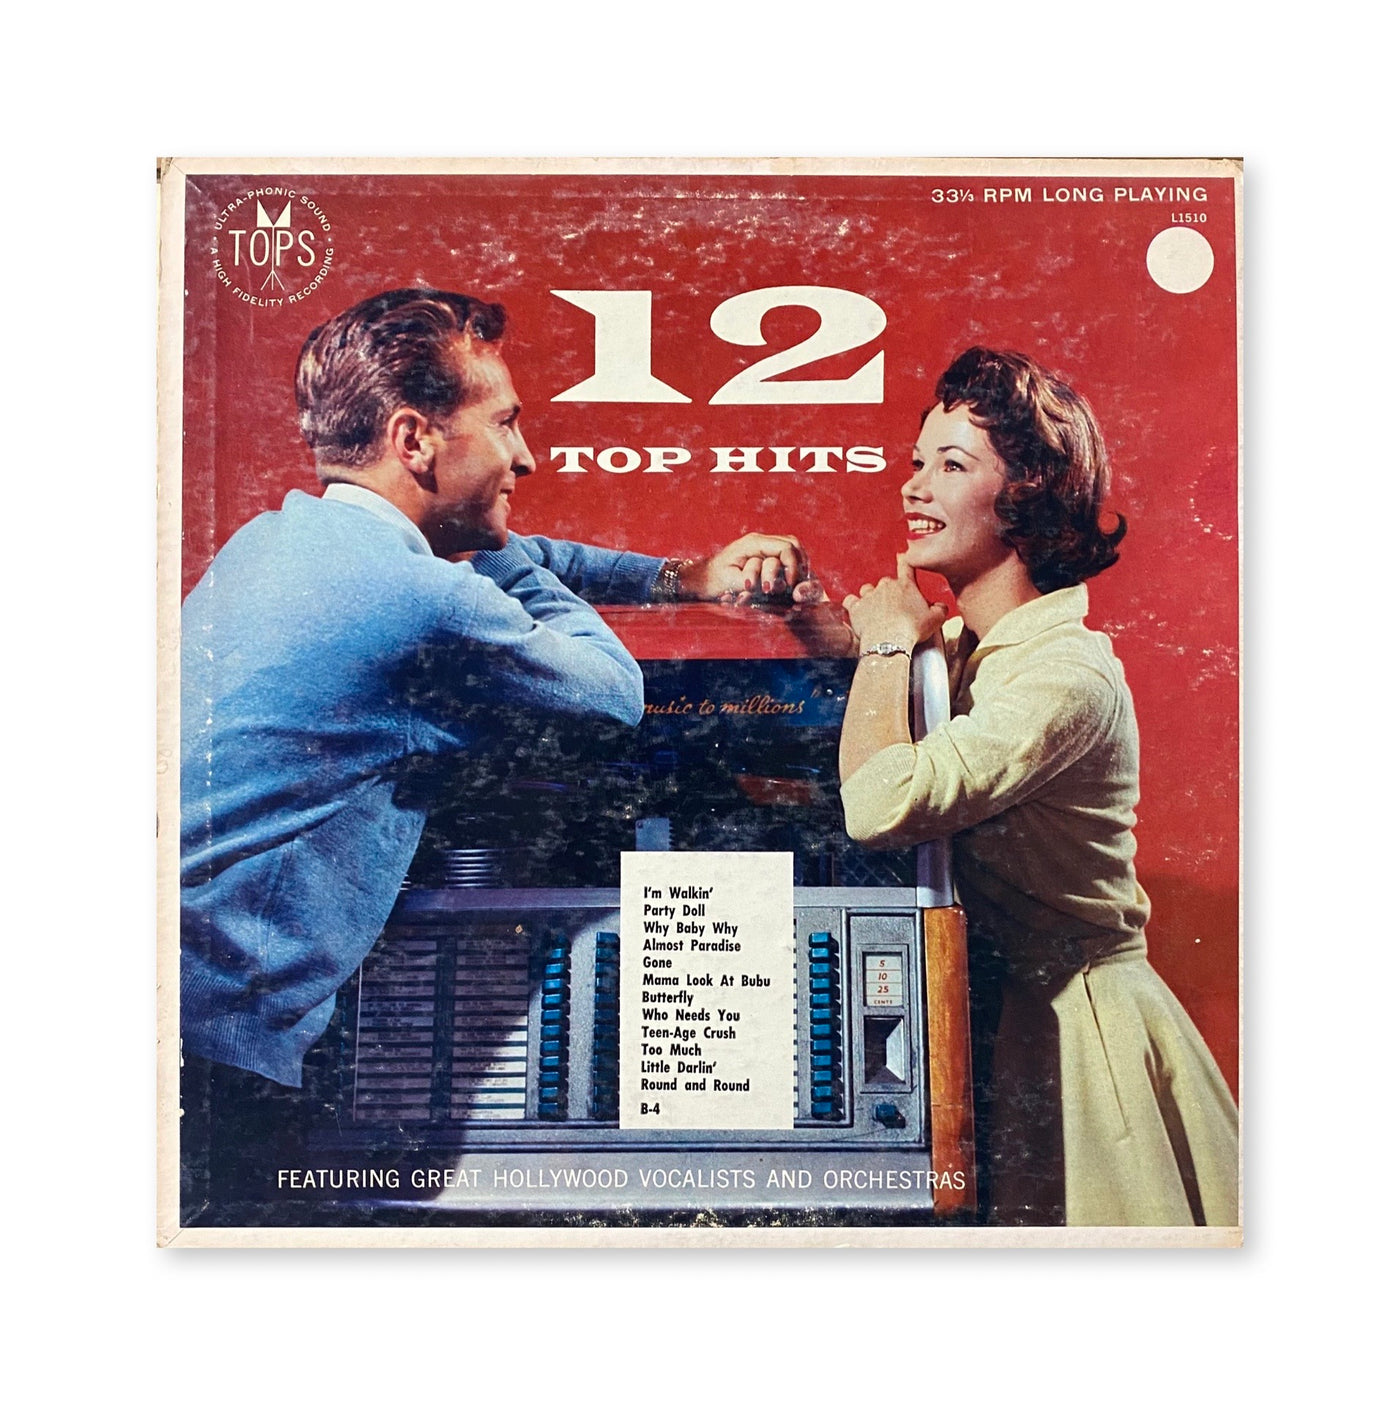 Lew Raymond And His Orchestra With The Toppers - 12 Top Hits